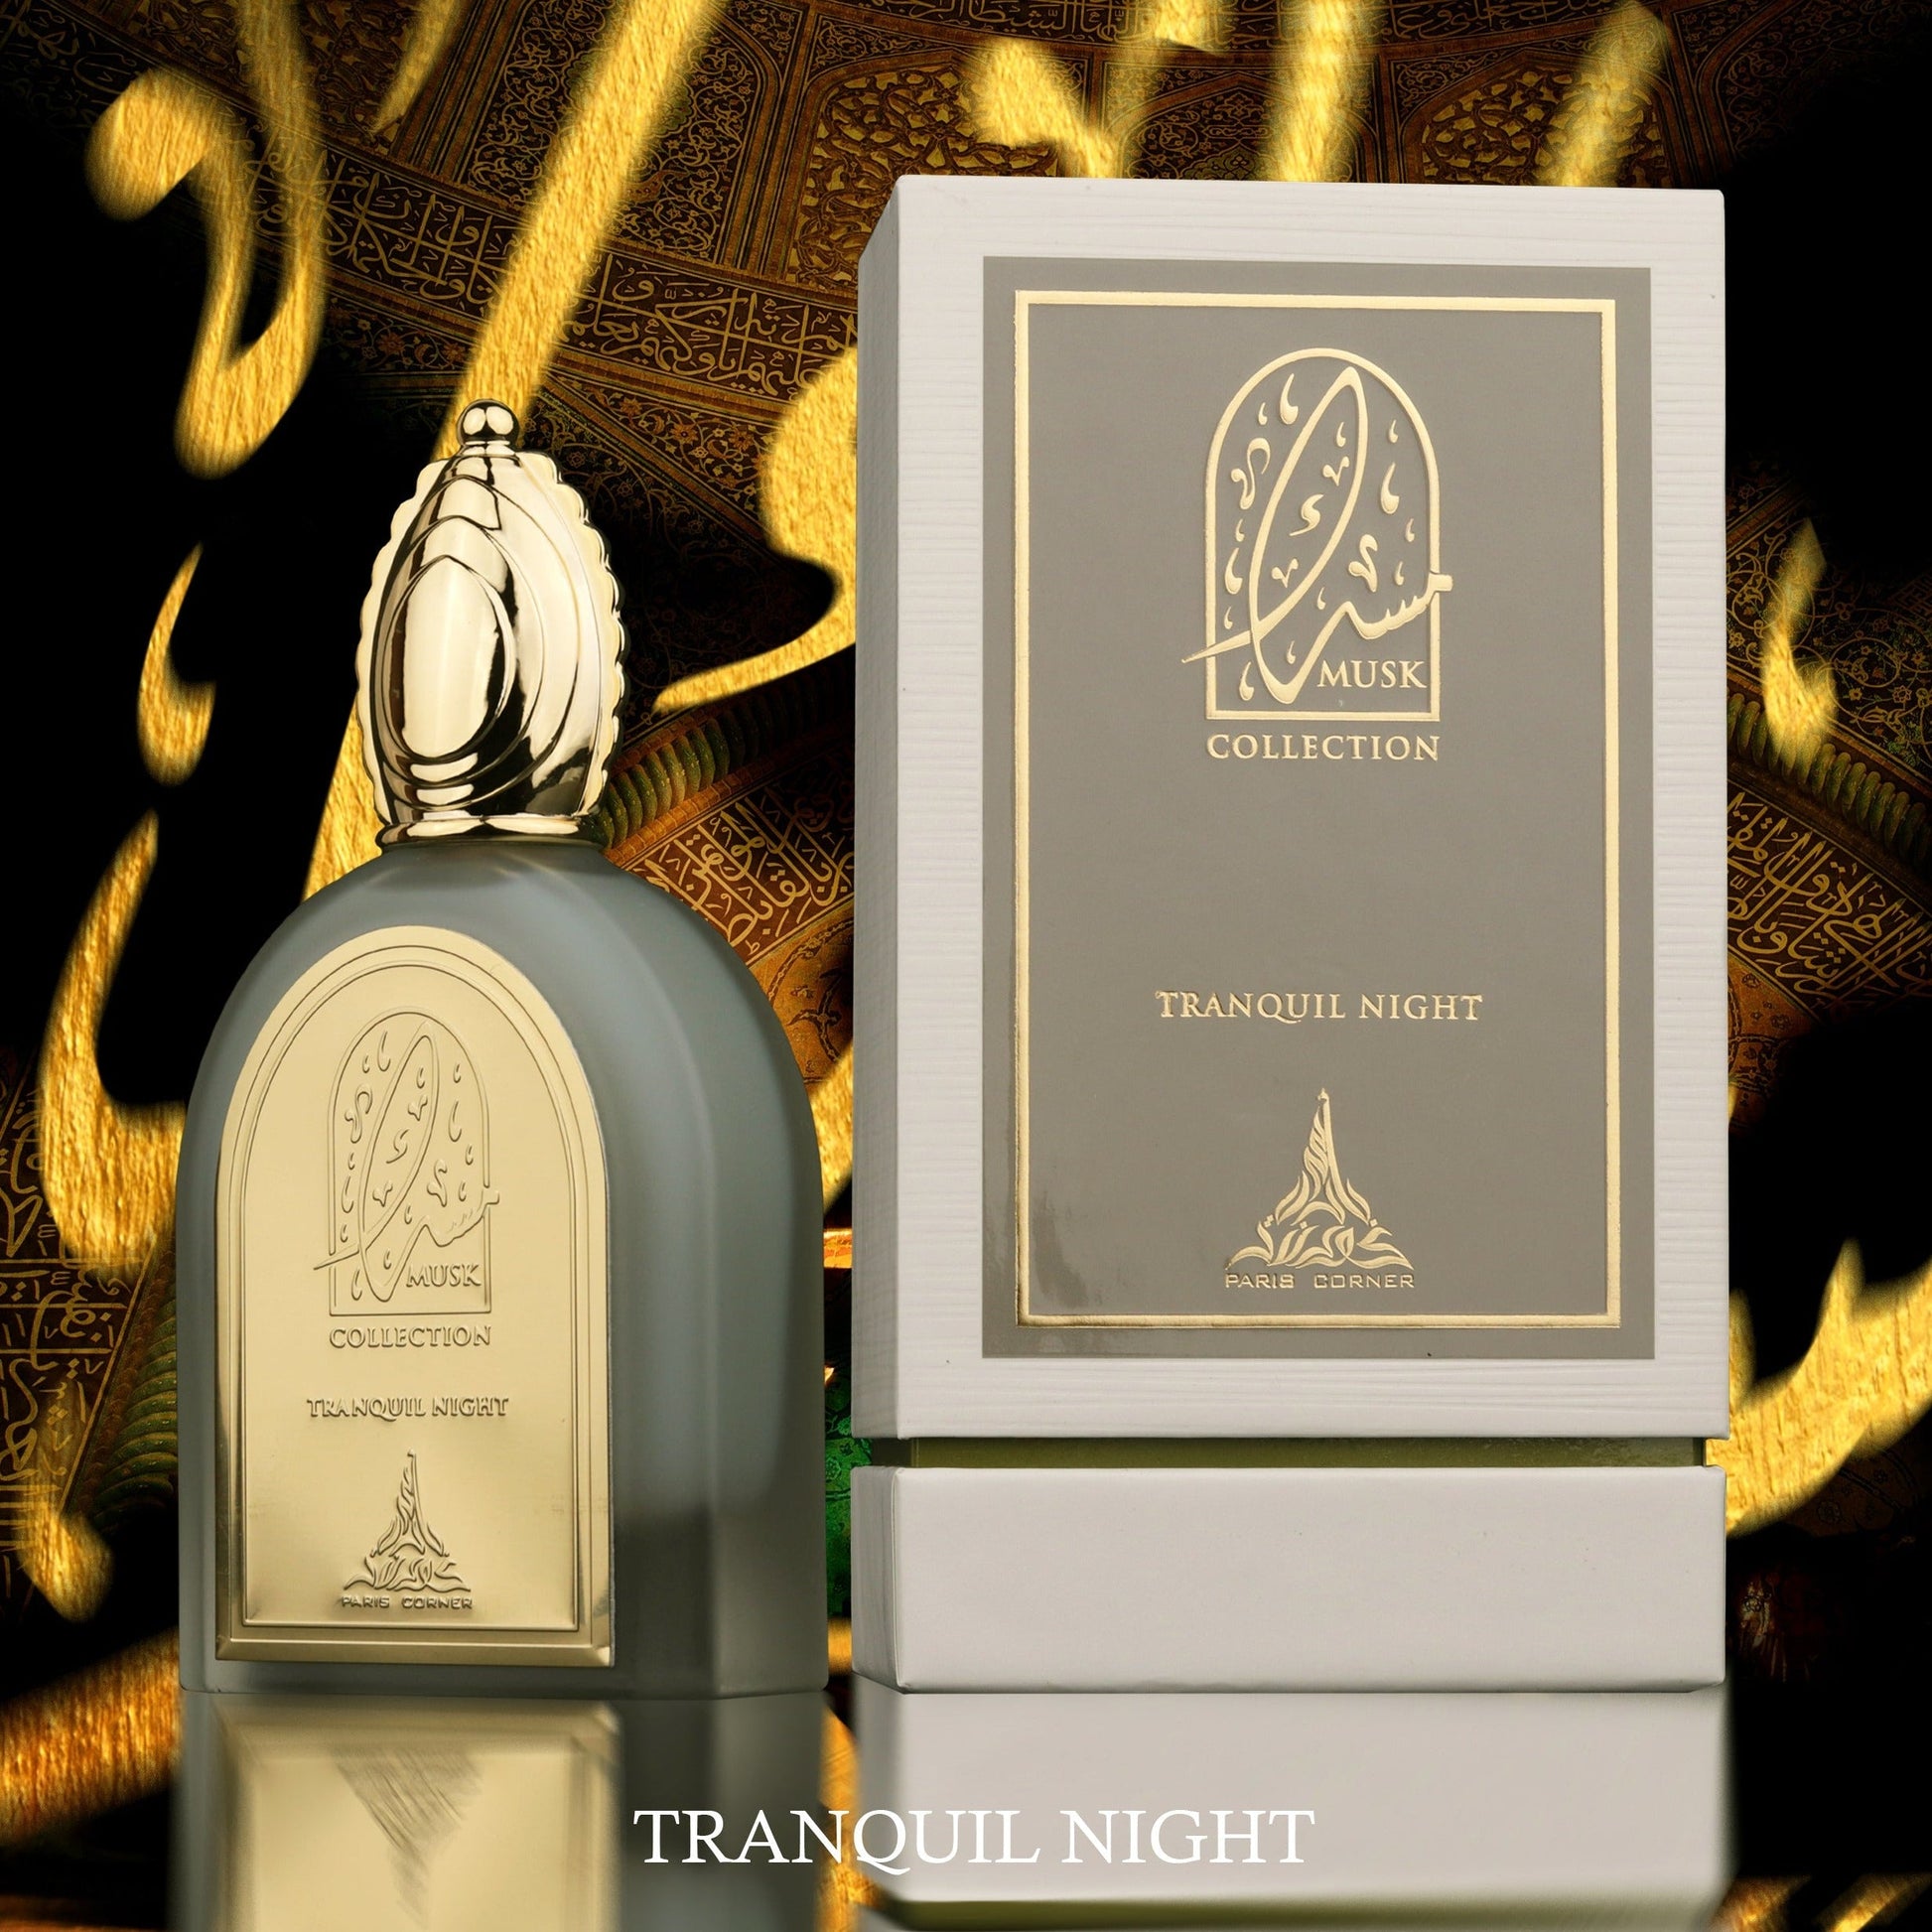 TRANQUIL NIGHT -MUSK COLLECTION